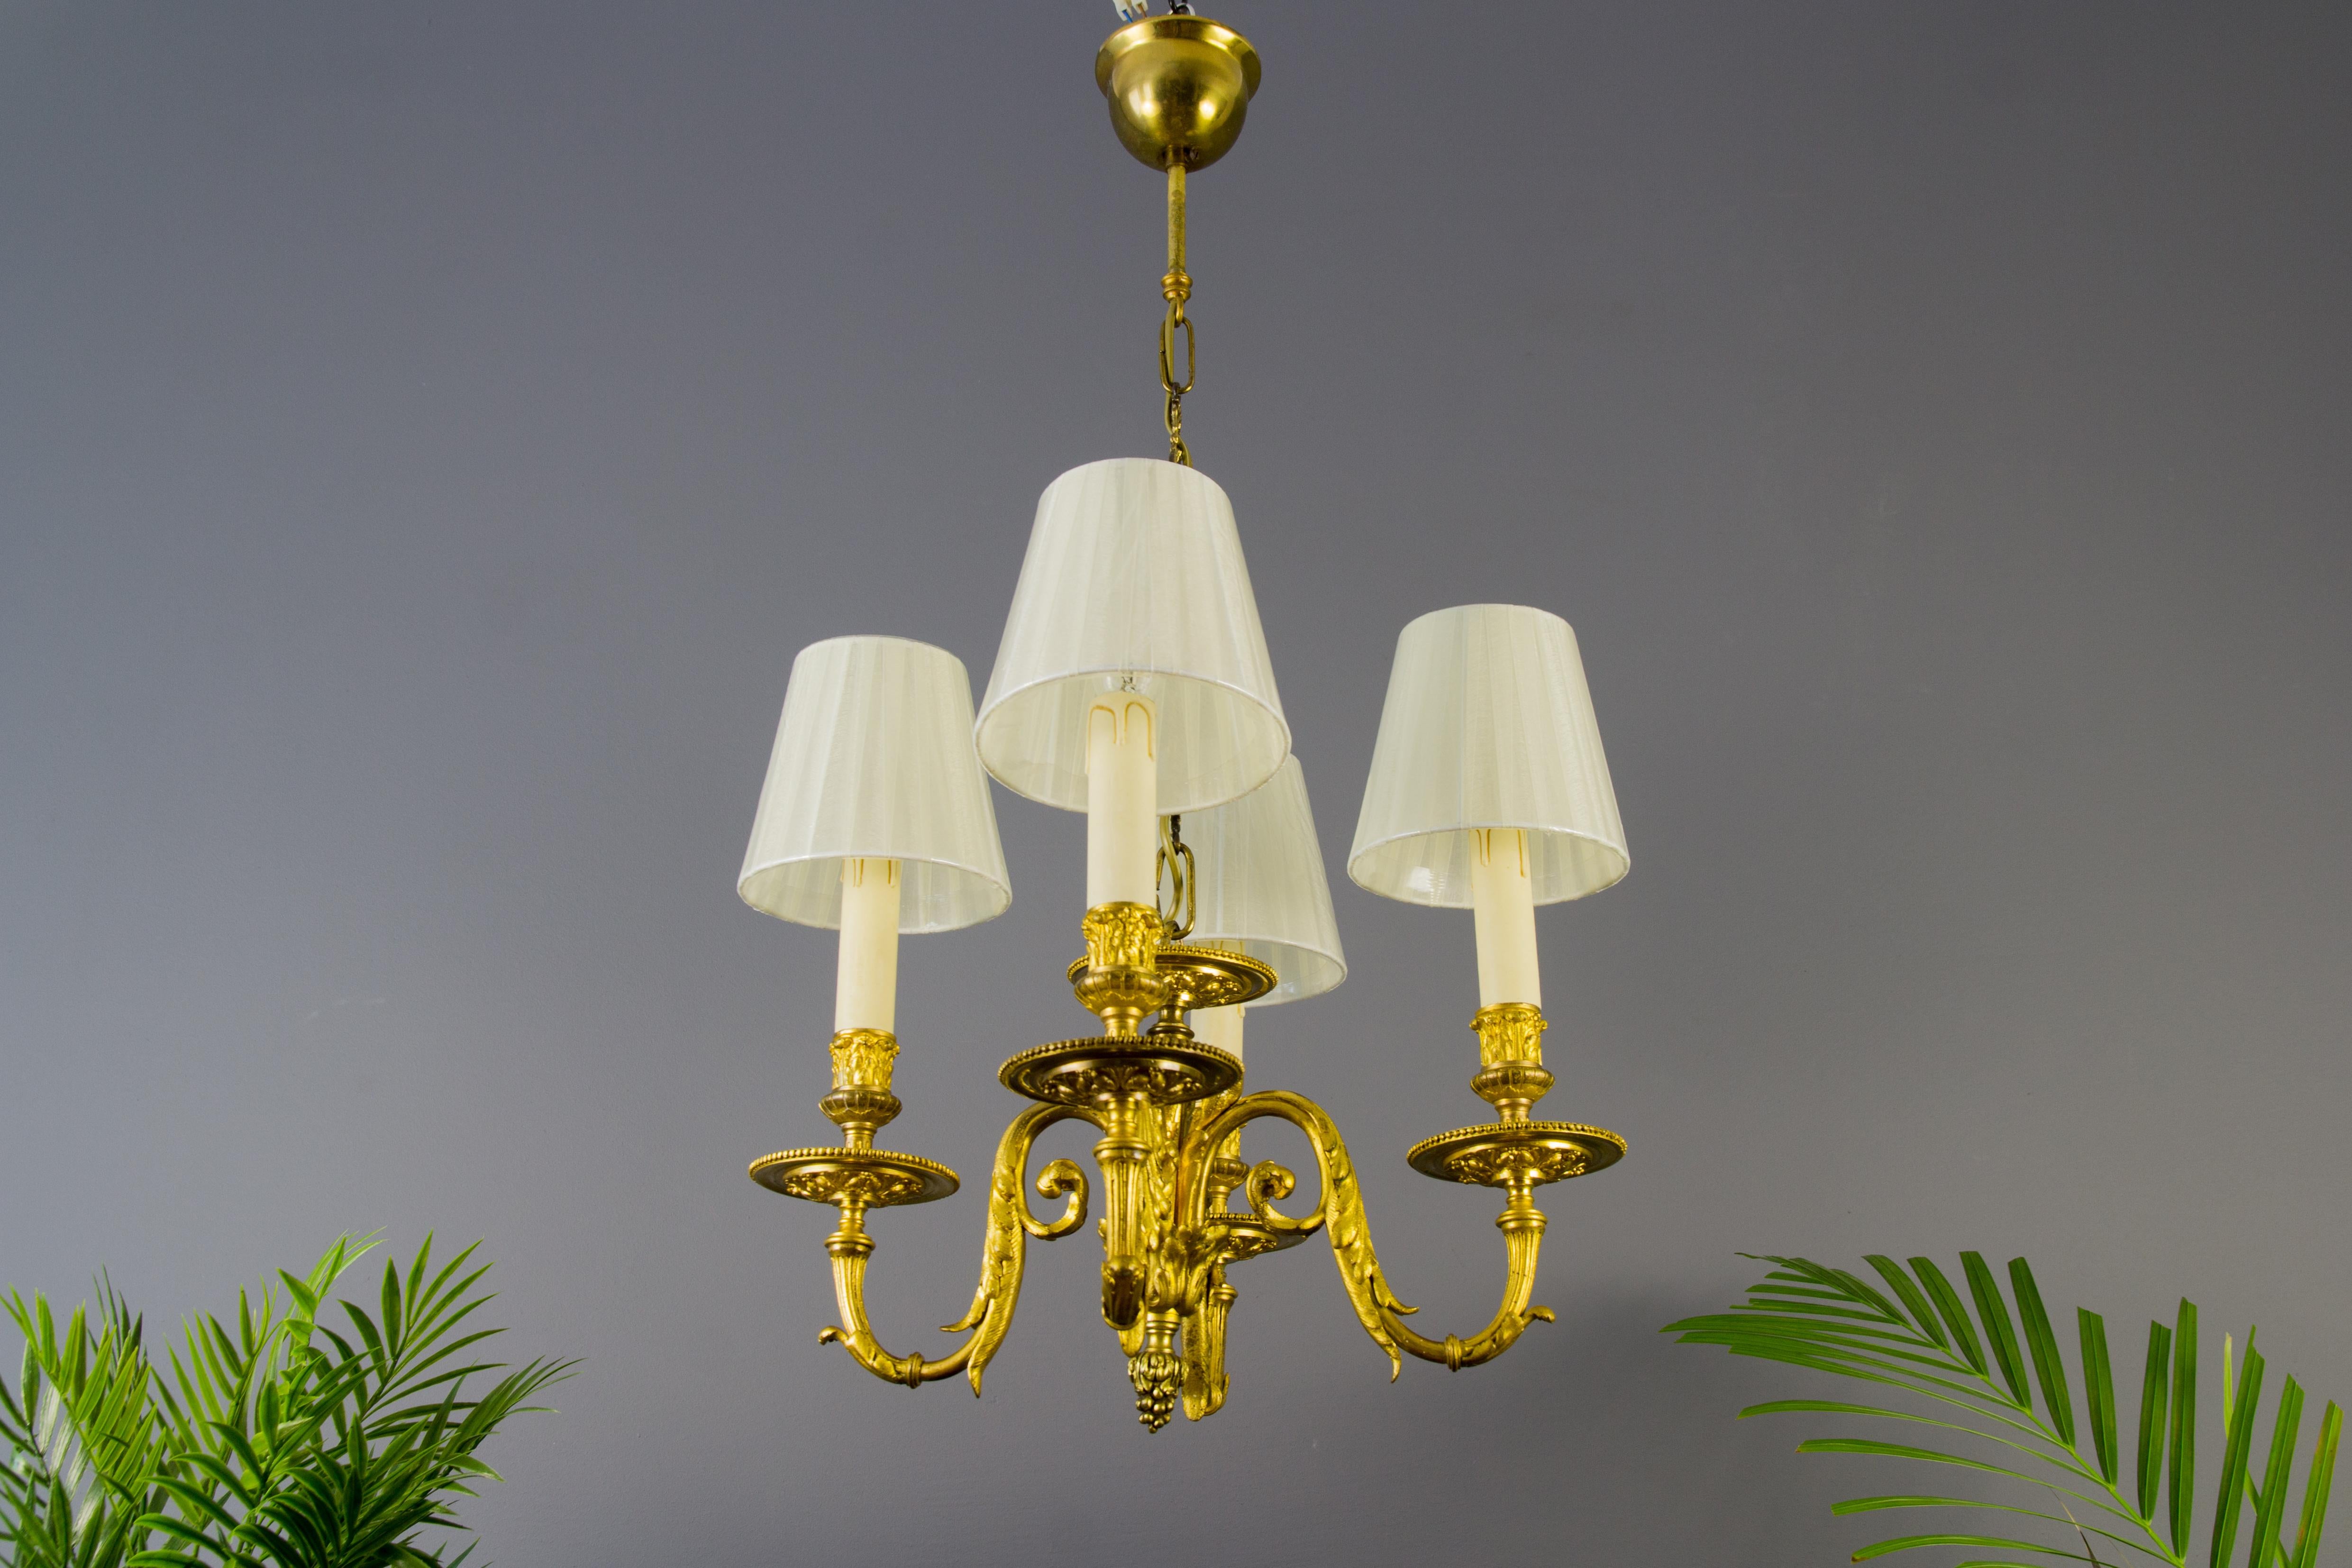 An exquisite French Louis XVI style four-light chandelier. Originally crafted for 4 candles, this antique chandelier has been electrified. Beautiful finely made bronze foliate motifs. Four bronze arms, each with a socket for the E 14 size light bulb